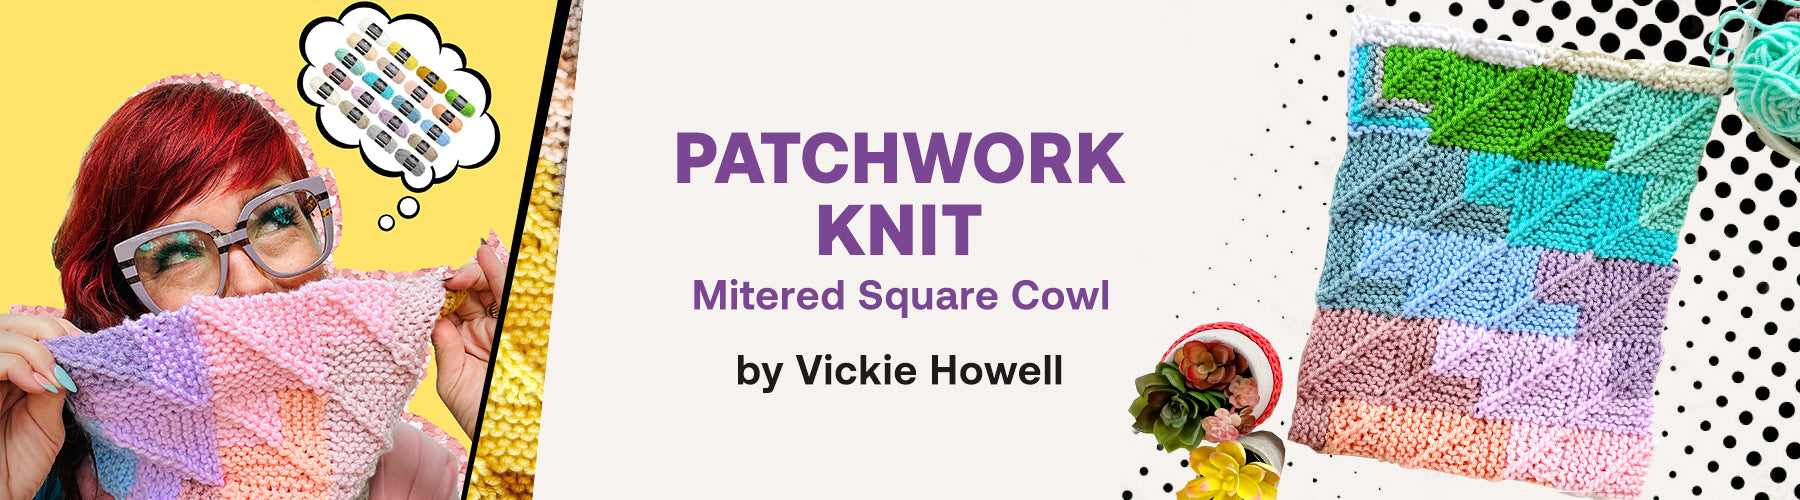 Patchwork Knit Mitered Square Cowl By Vickie Howell